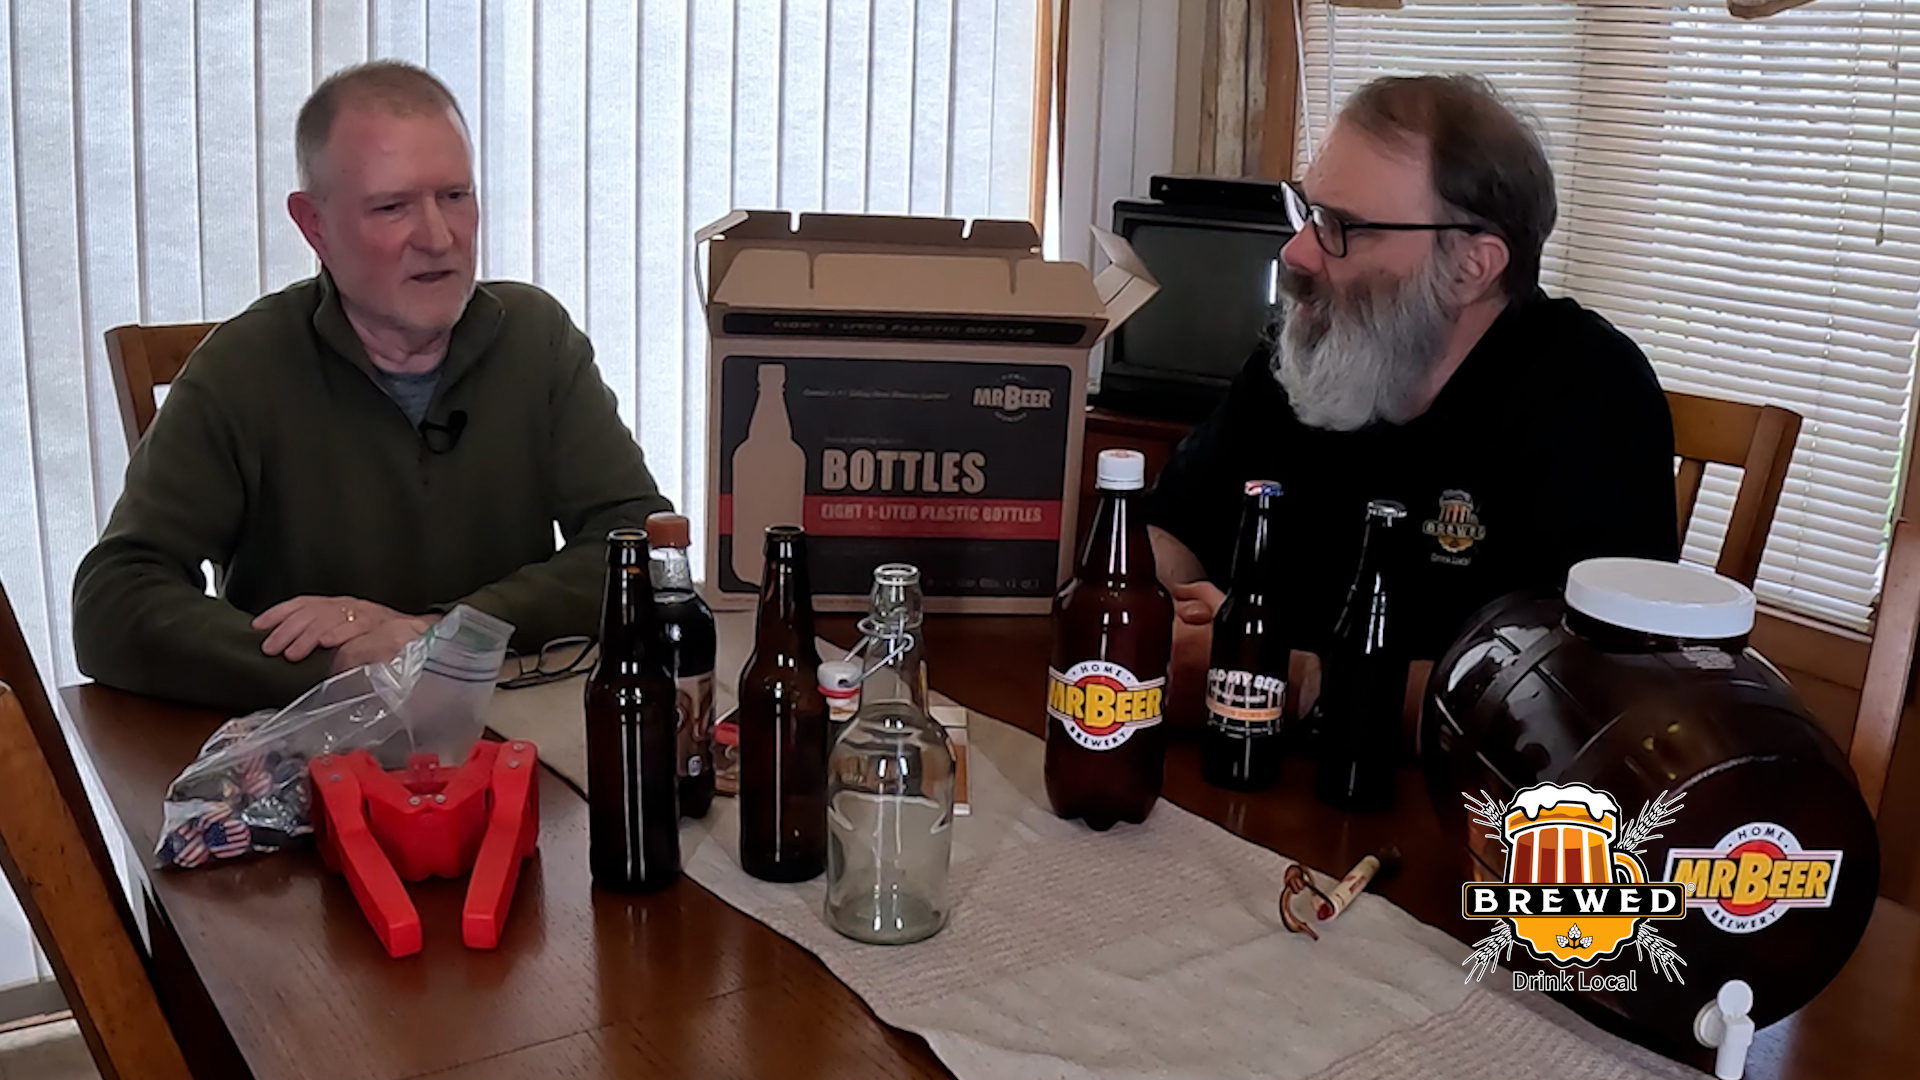 After your homebrewed beer has fermented, it's time to bottle it! The Brewed Crew shows you how it's done.